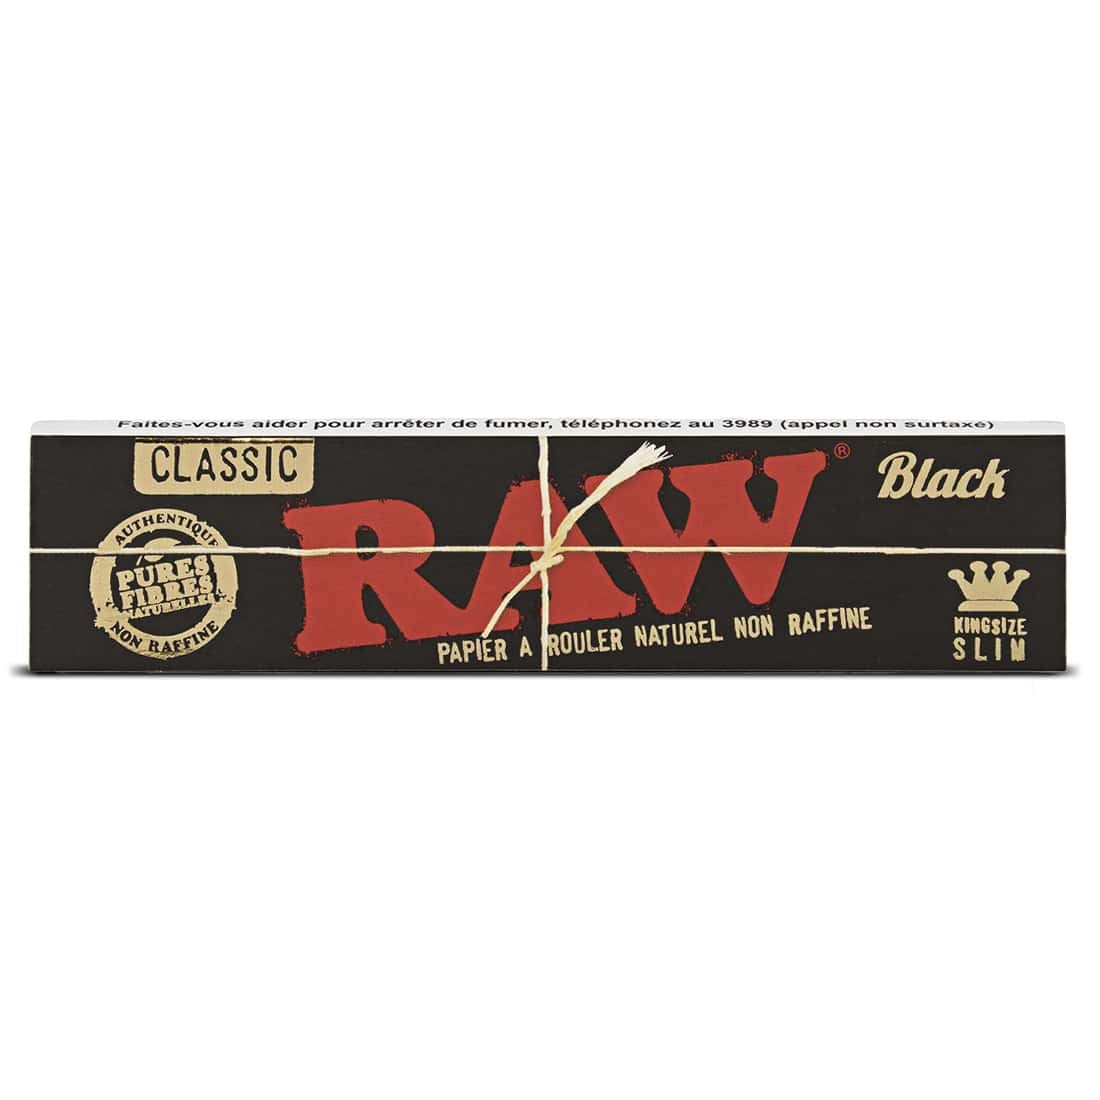 RAW Black Feuille a Rouler